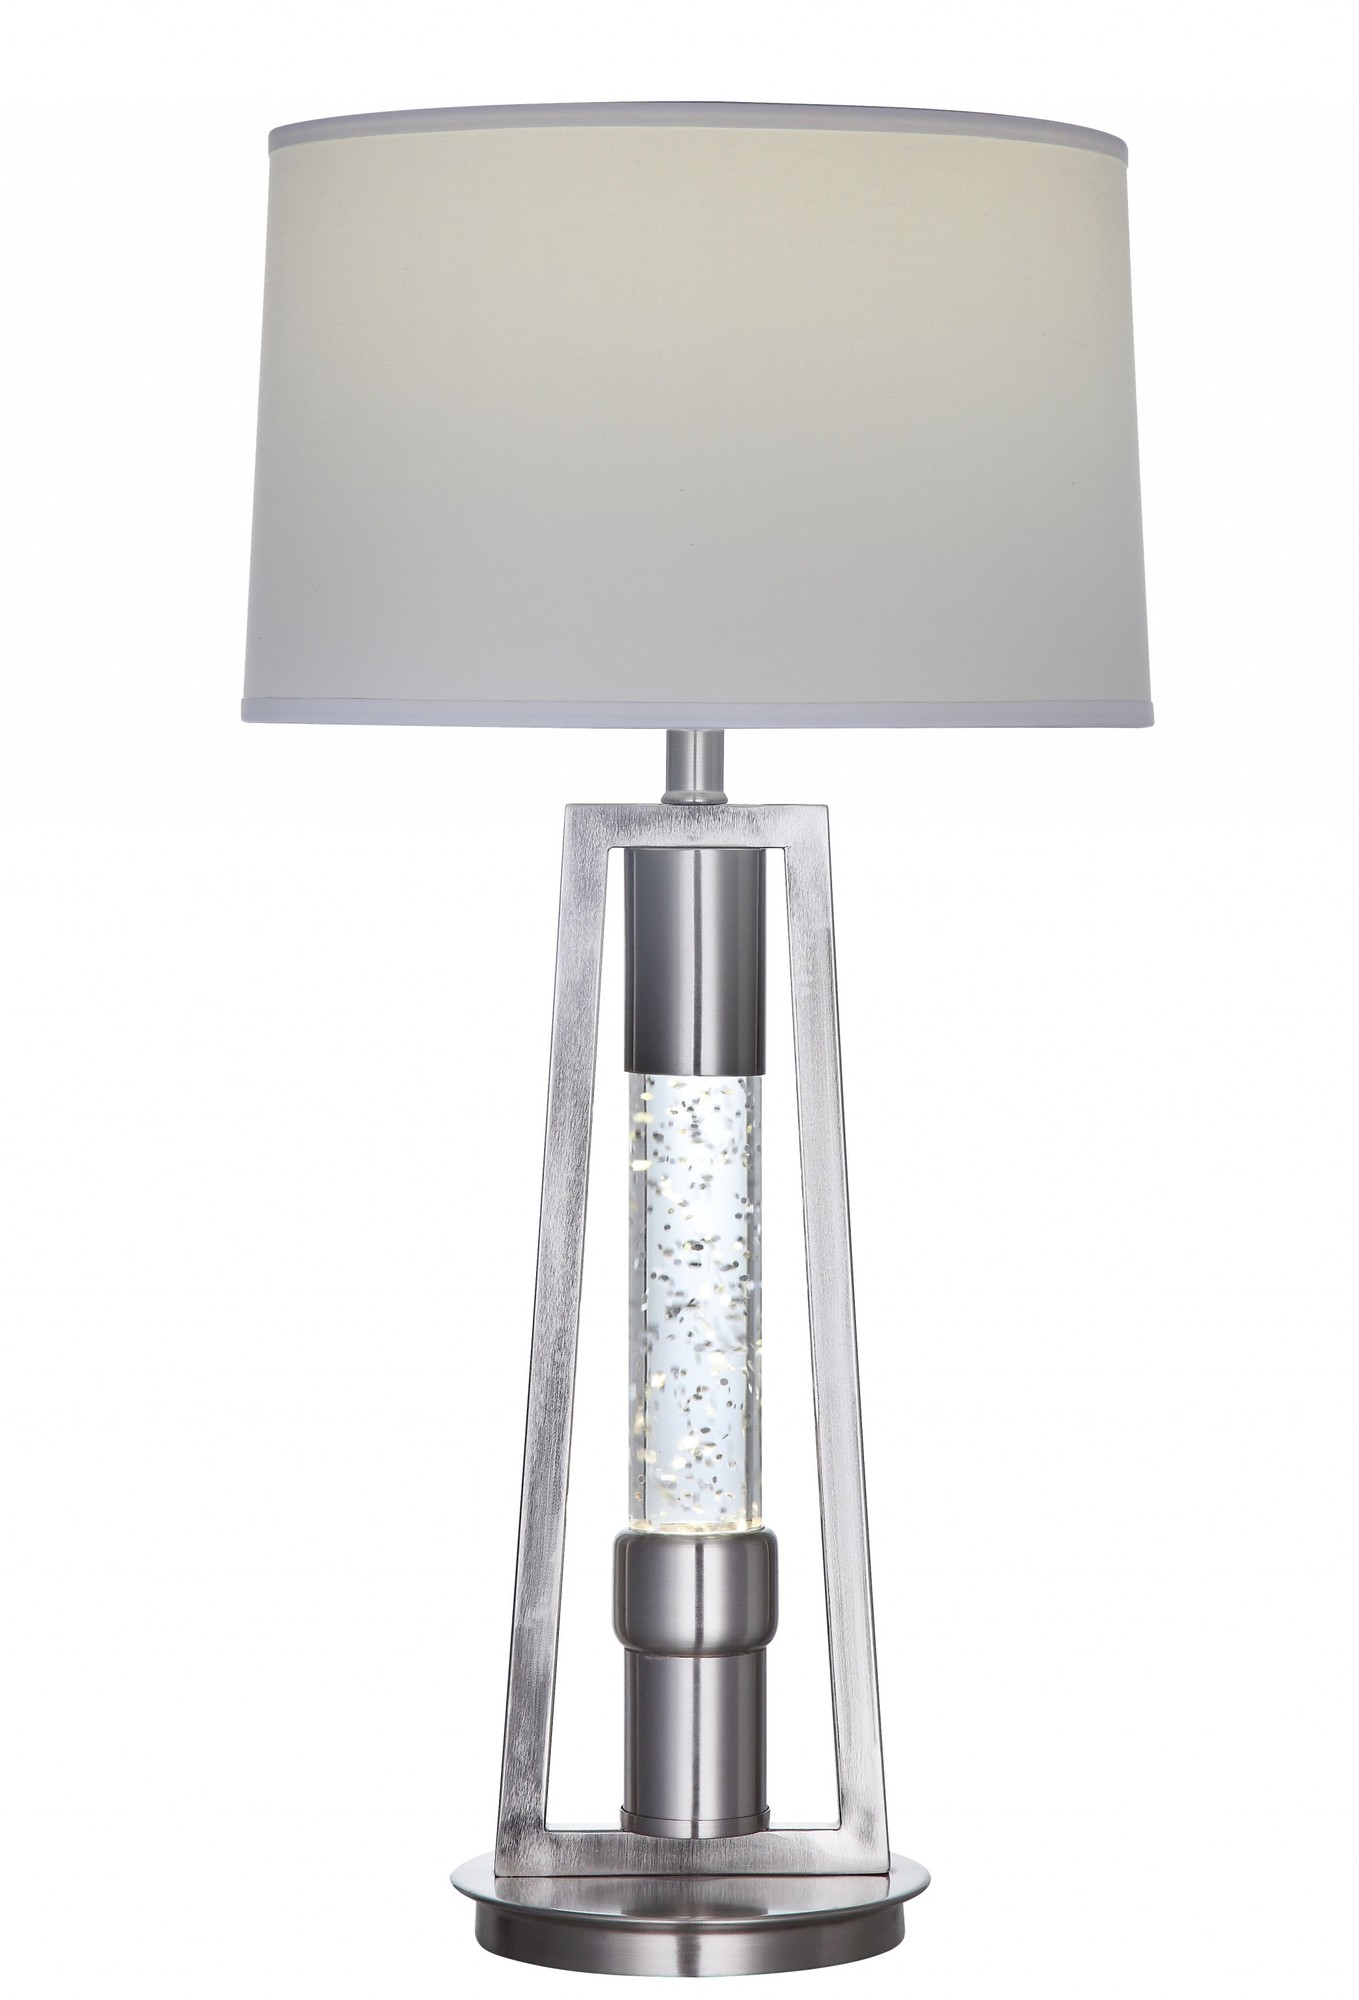 15" X 15" X 31" Brushed Nickel Metal Glass LED Shade Table Lamp